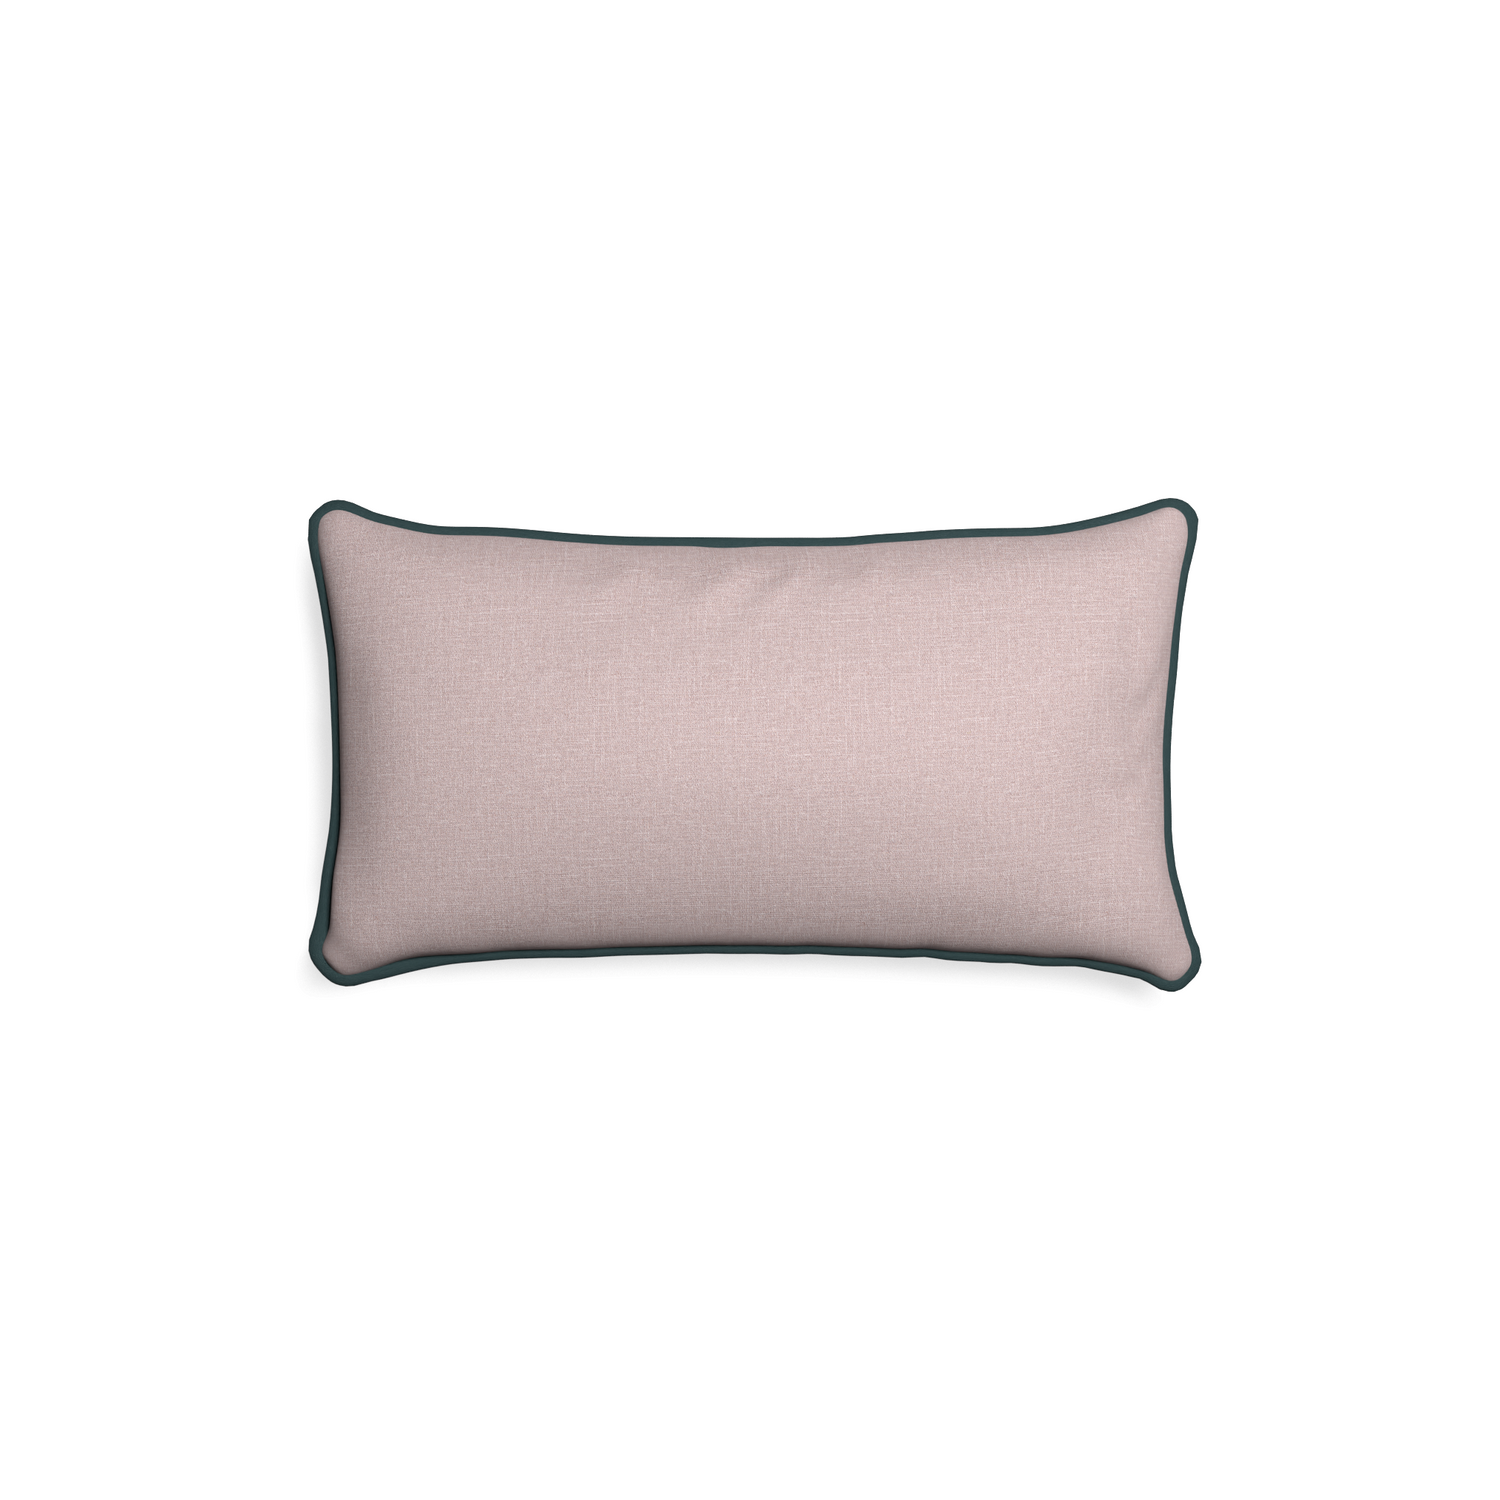 Petite-lumbar orchid custom mauve pinkpillow with p piping on white background